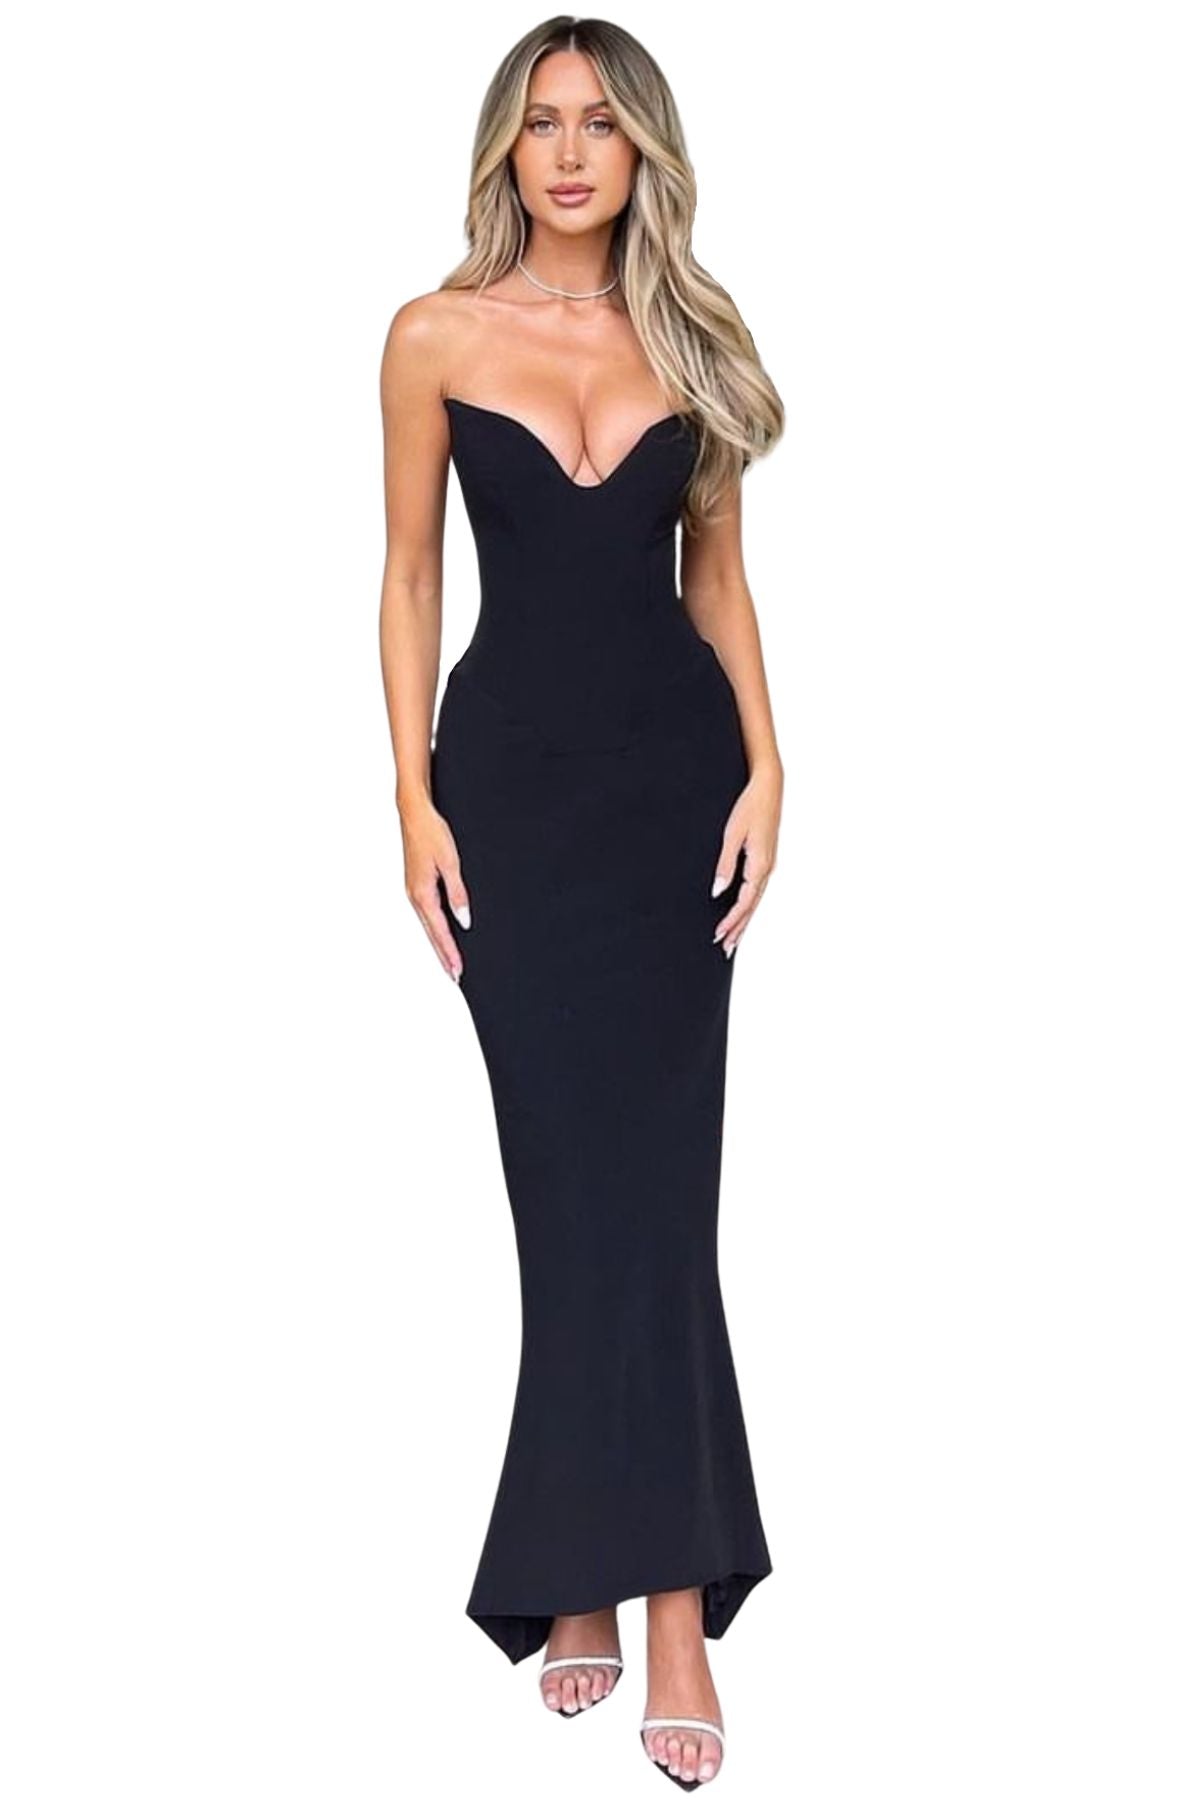 Hire HOUSE OF CB Persephone Black Strapless Corset Dress in Black –  TheOnlyDress Hire